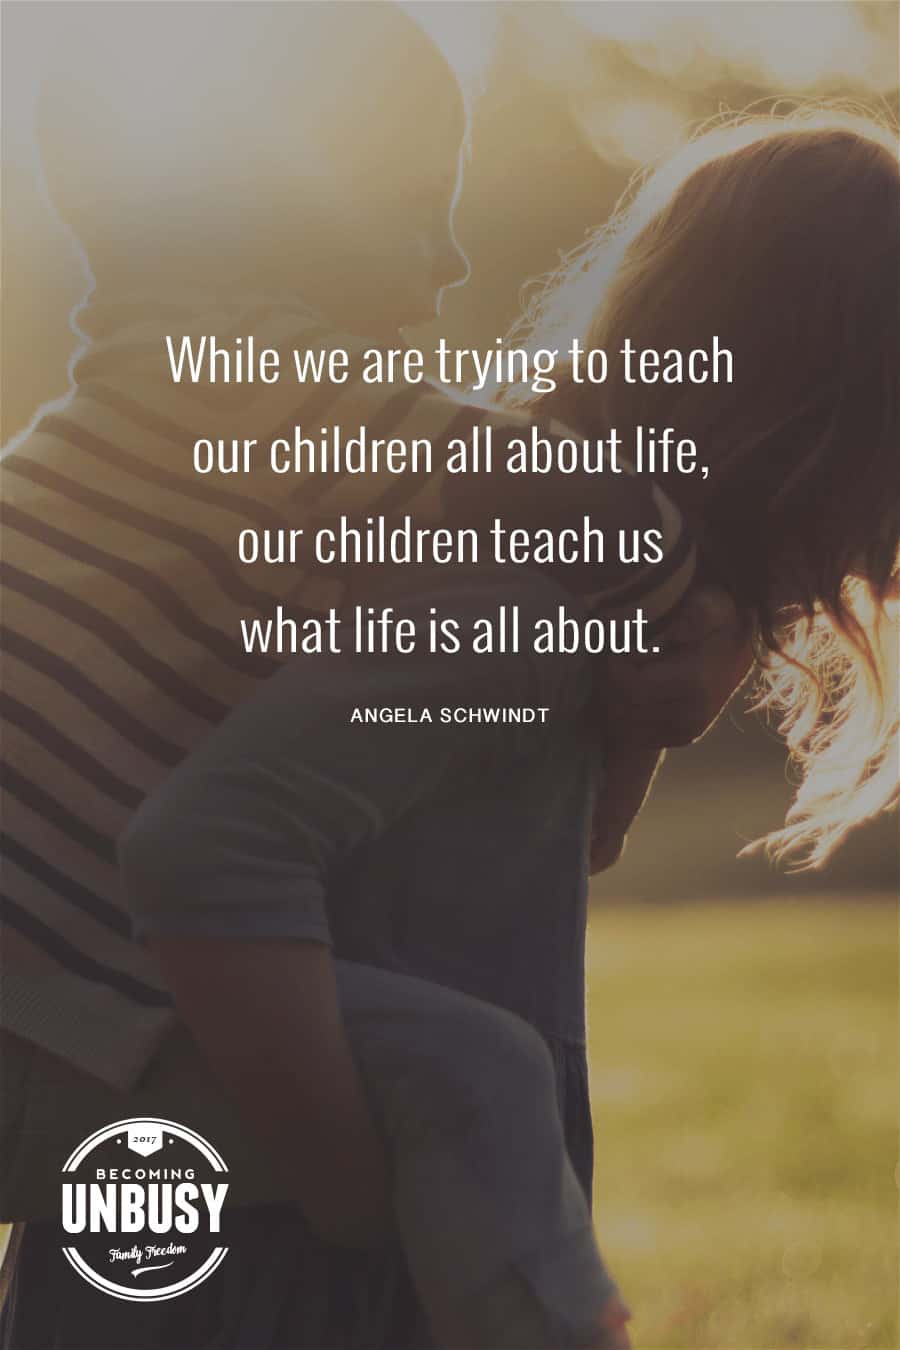 While we are trying to teach our children all about life, our children teach us what life is all about. - Angela Schwindt #quote #parenting #BecomingUnbusy *love this video and site